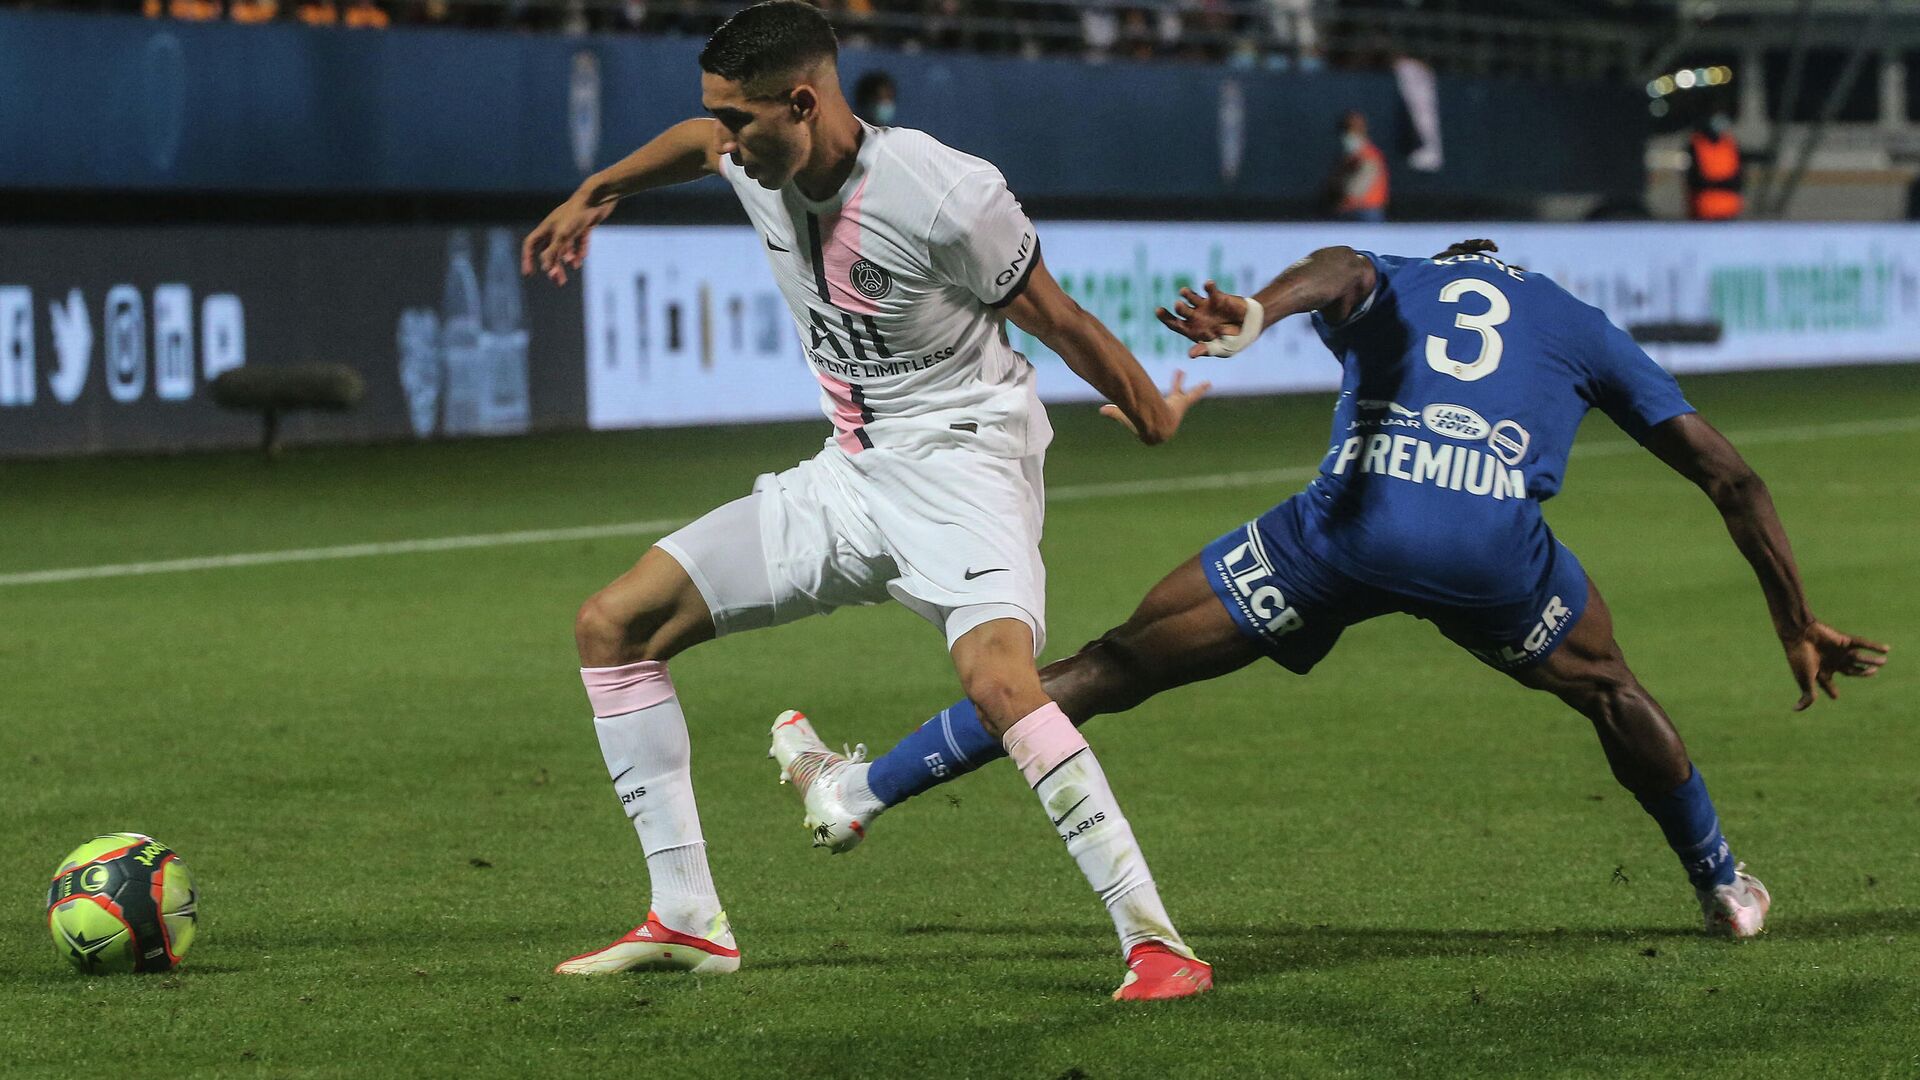 Paris Saint-Germain's Moroccan defender Achraf Hakimi (L) fights for the ball against Troyes Malian defender Youssouf Kone  during the French L1 football match between Paris Saint-Germain (PSG) and ES Troyes at the Stade de l'Aube in Troyes on August 7, 2021. (Photo by Franзois NASCIMBENI / AFP) - РИА Новости, 1920, 08.08.2021